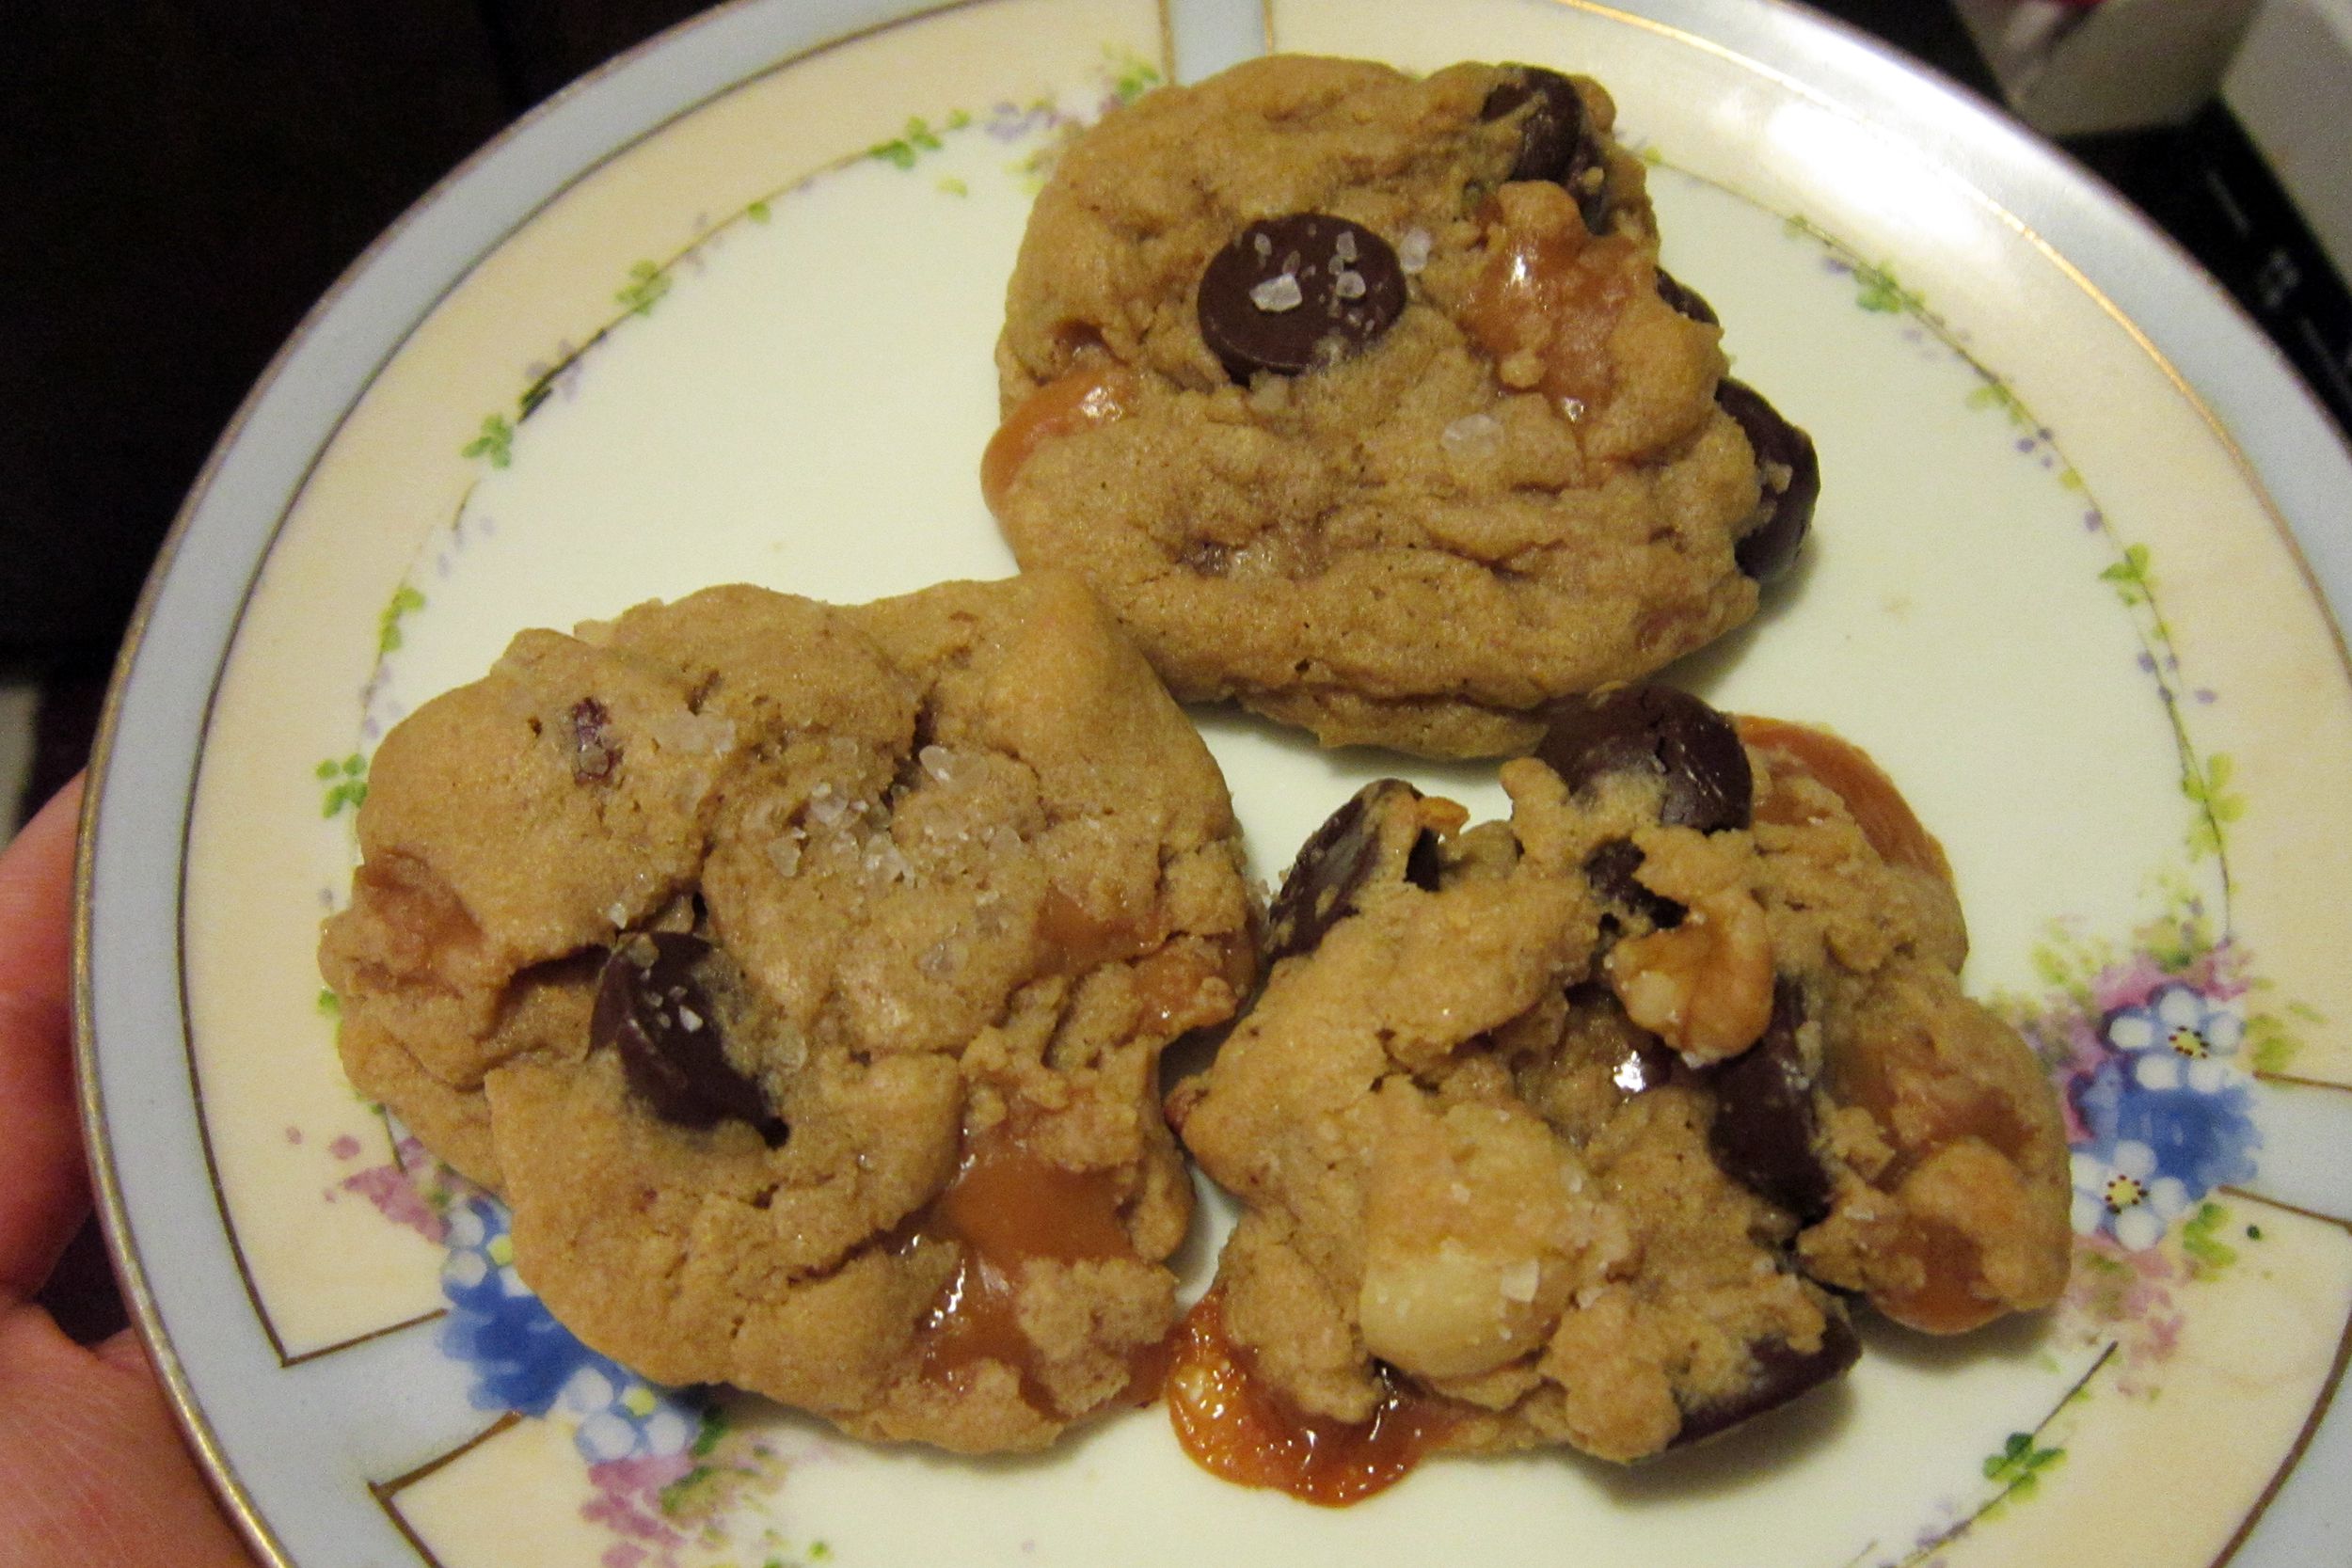 <p>Caramel lovers will rejoice at the way soft, creamy, buttery caramel enhances a tender chocolate chip cookie. The main trick is inserting a caramel candy inside each cookie-dough ball before baking, but there are a few other details that make this recipe diverge from conventional chocolate chip cookie making. </p><p><b>Recipe:</b> <a href="https://chefsavvy.com/caramel-stuffed-chocolate-chip-cookies/">Chef Savvy</a></p>